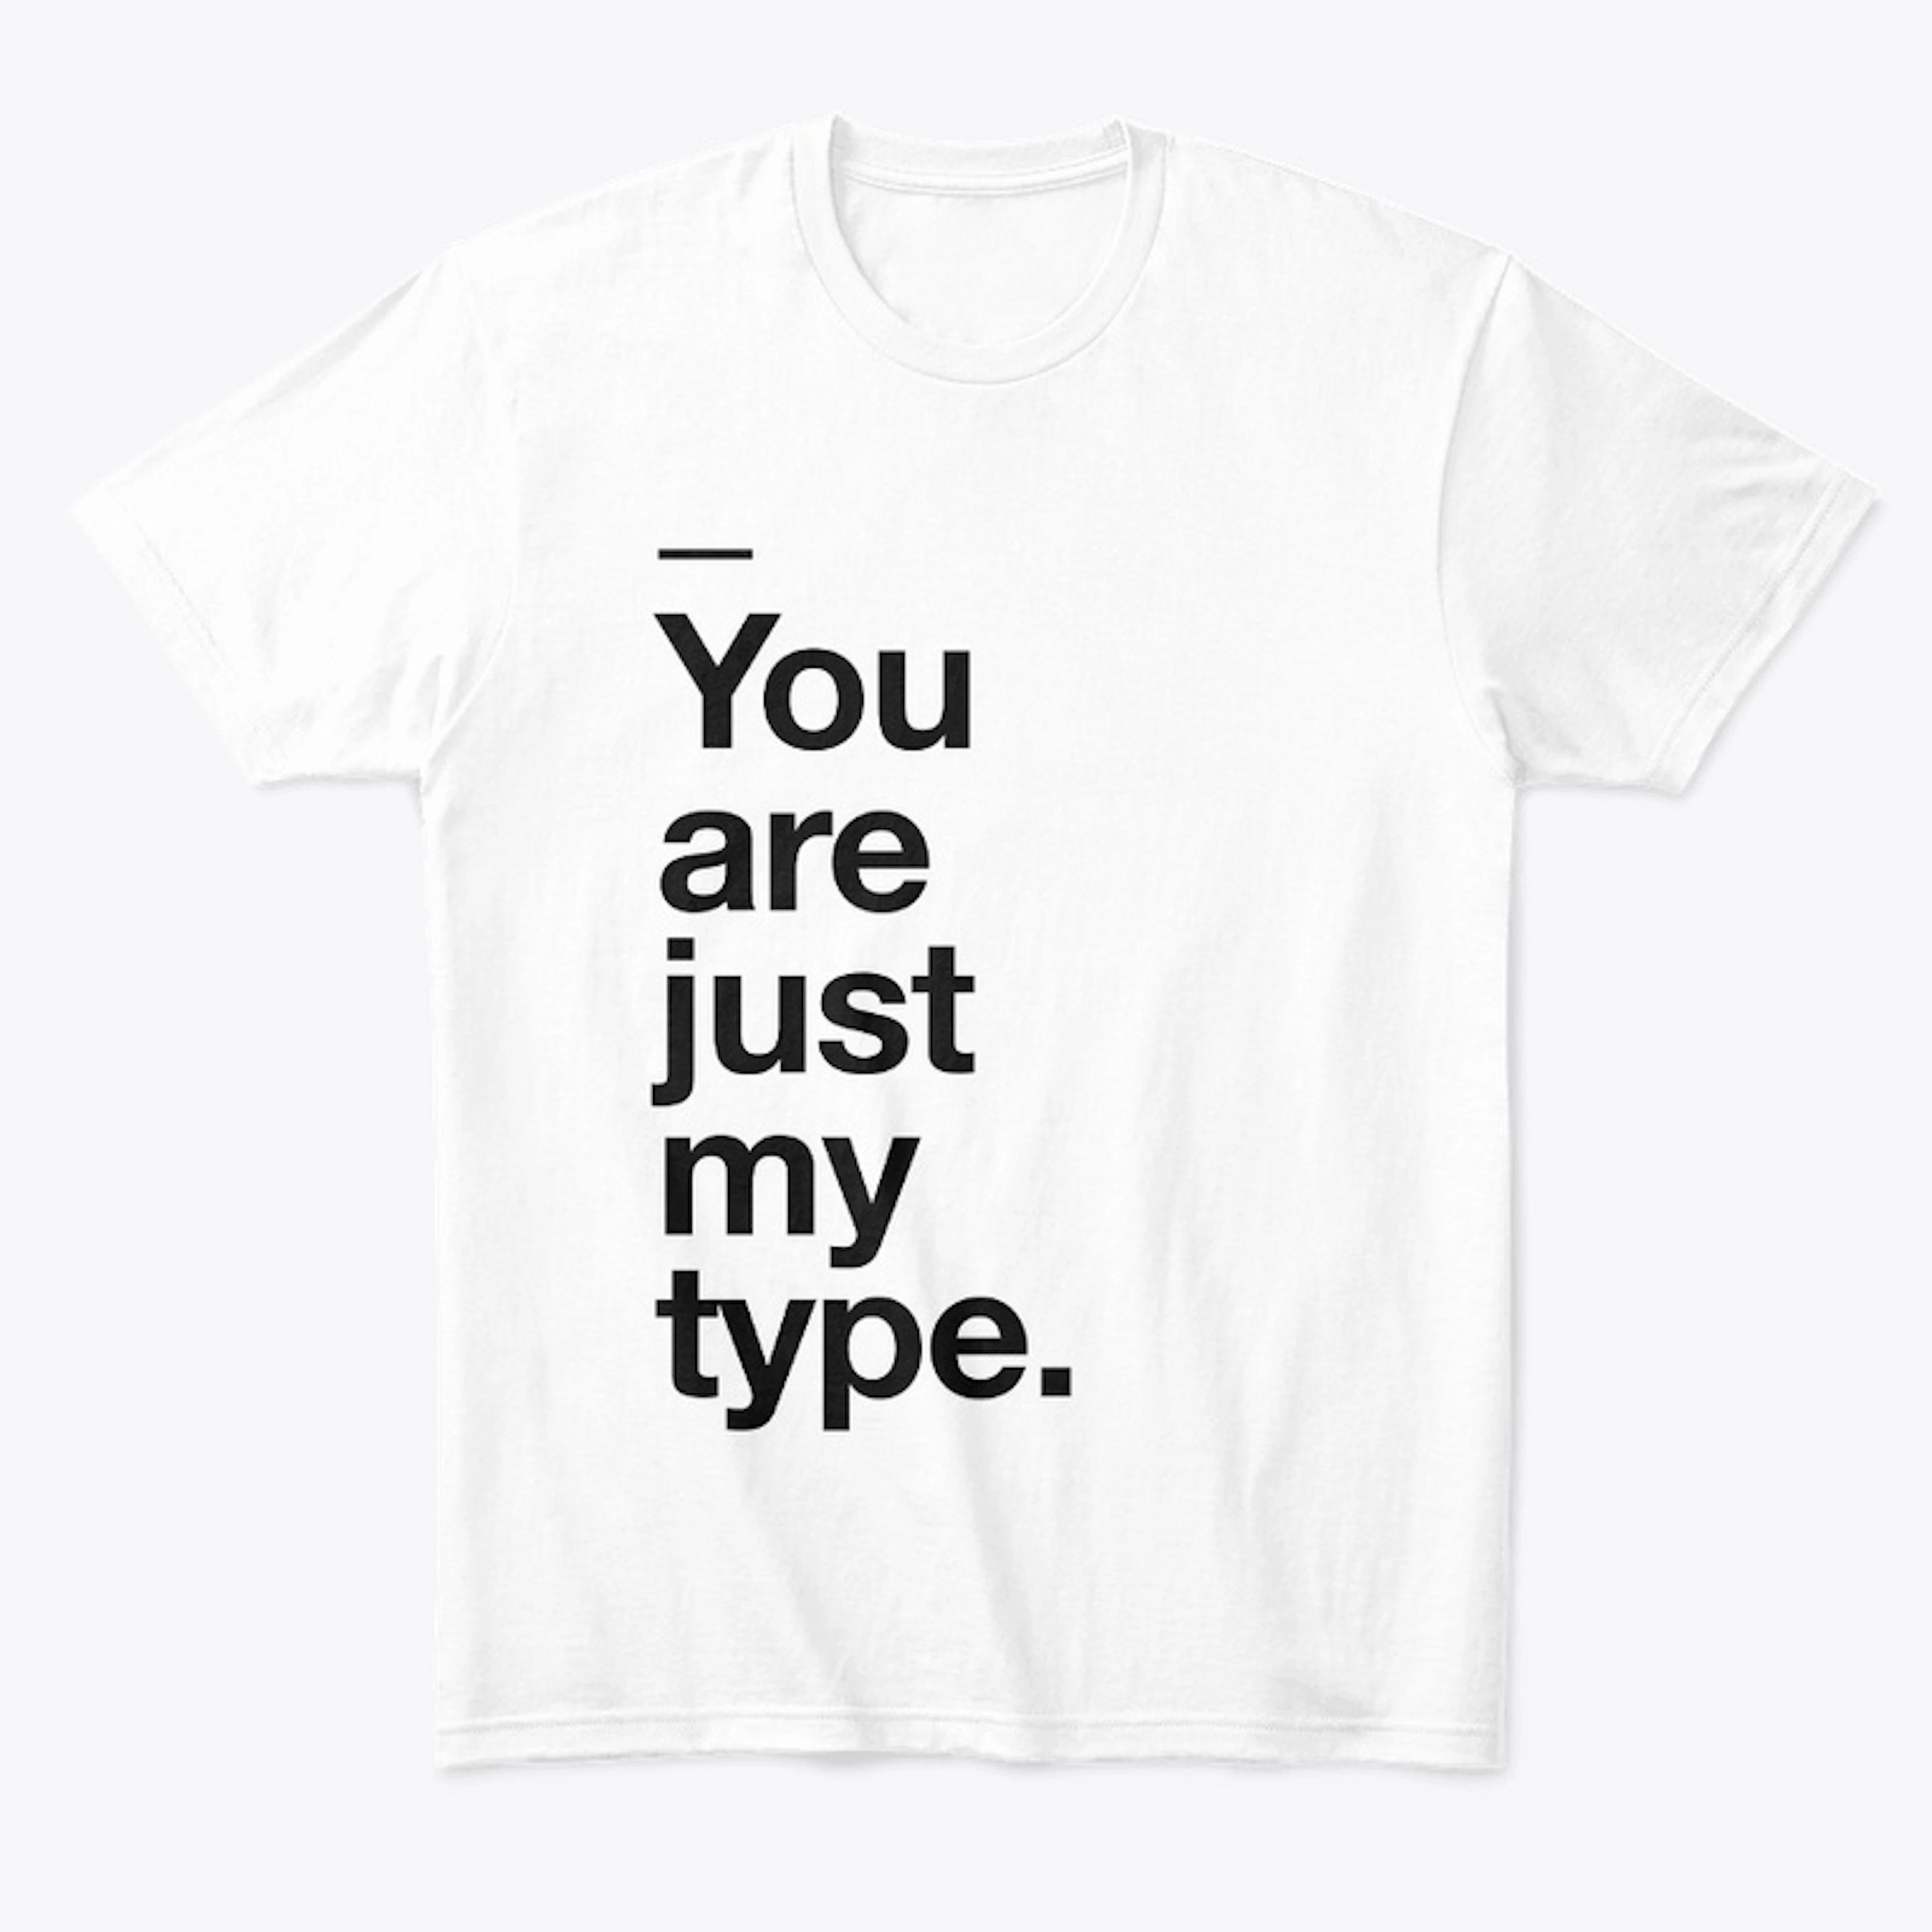 YOU ARE JUST MY TYPE - TSHIRT